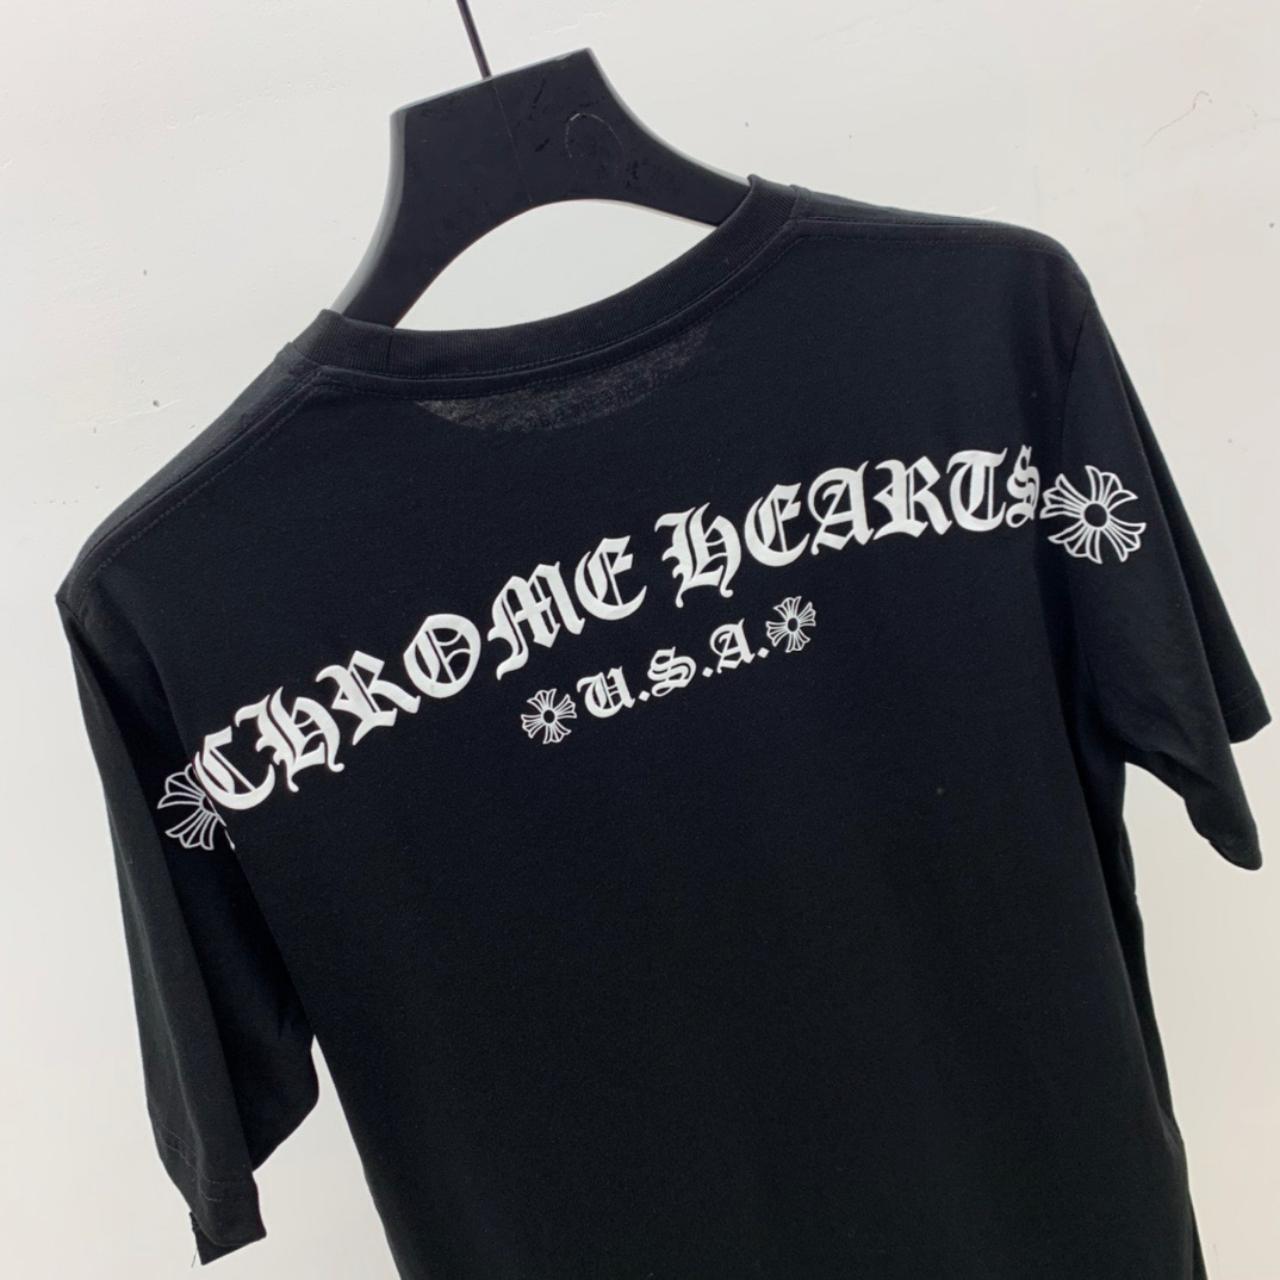 Chrome hearts tee Message me if you have any questions - Depop